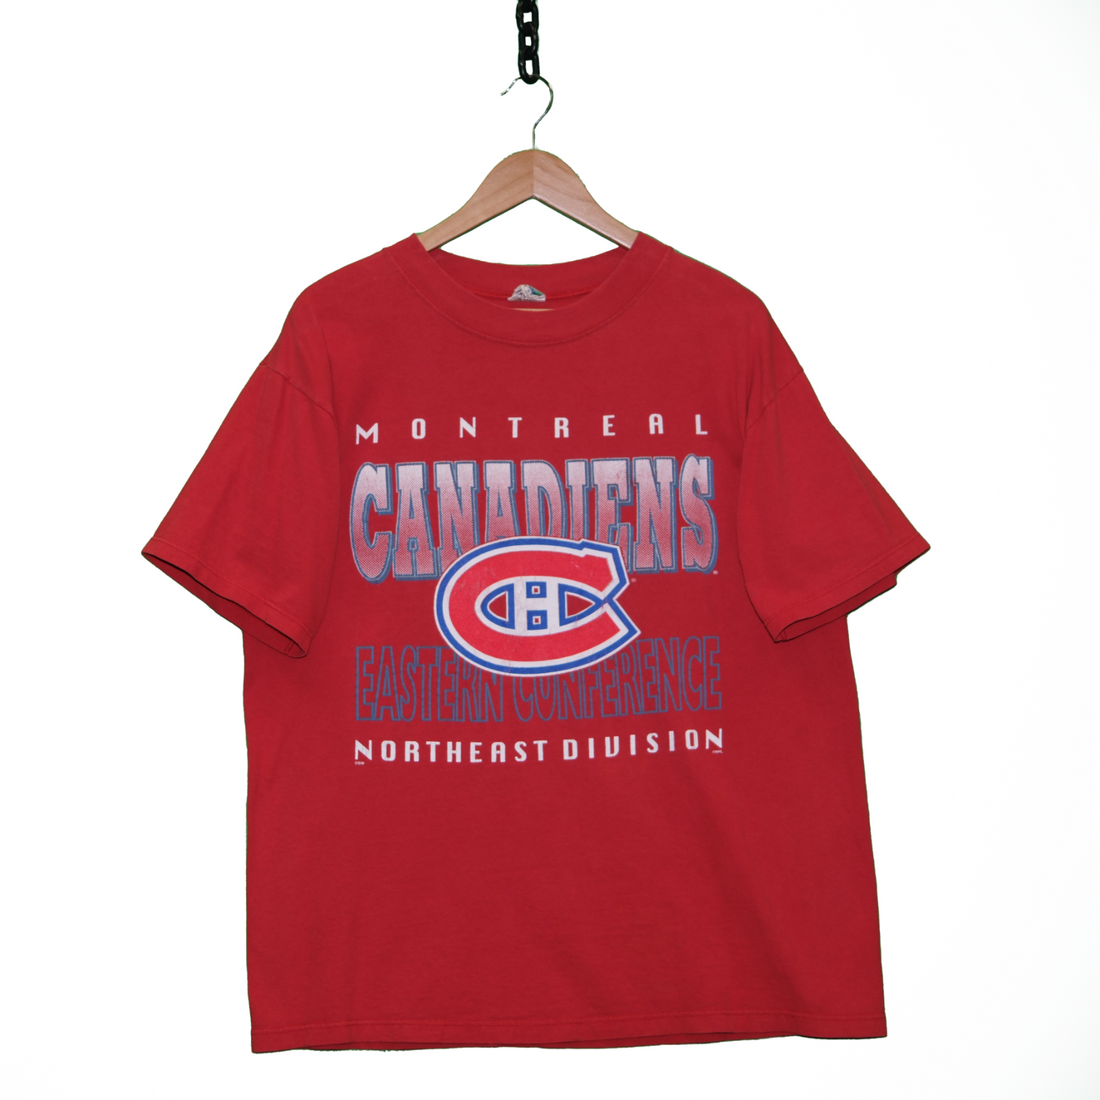 Vintage Montreal Canadiens T-Shirt Size Large Red 90s NHL